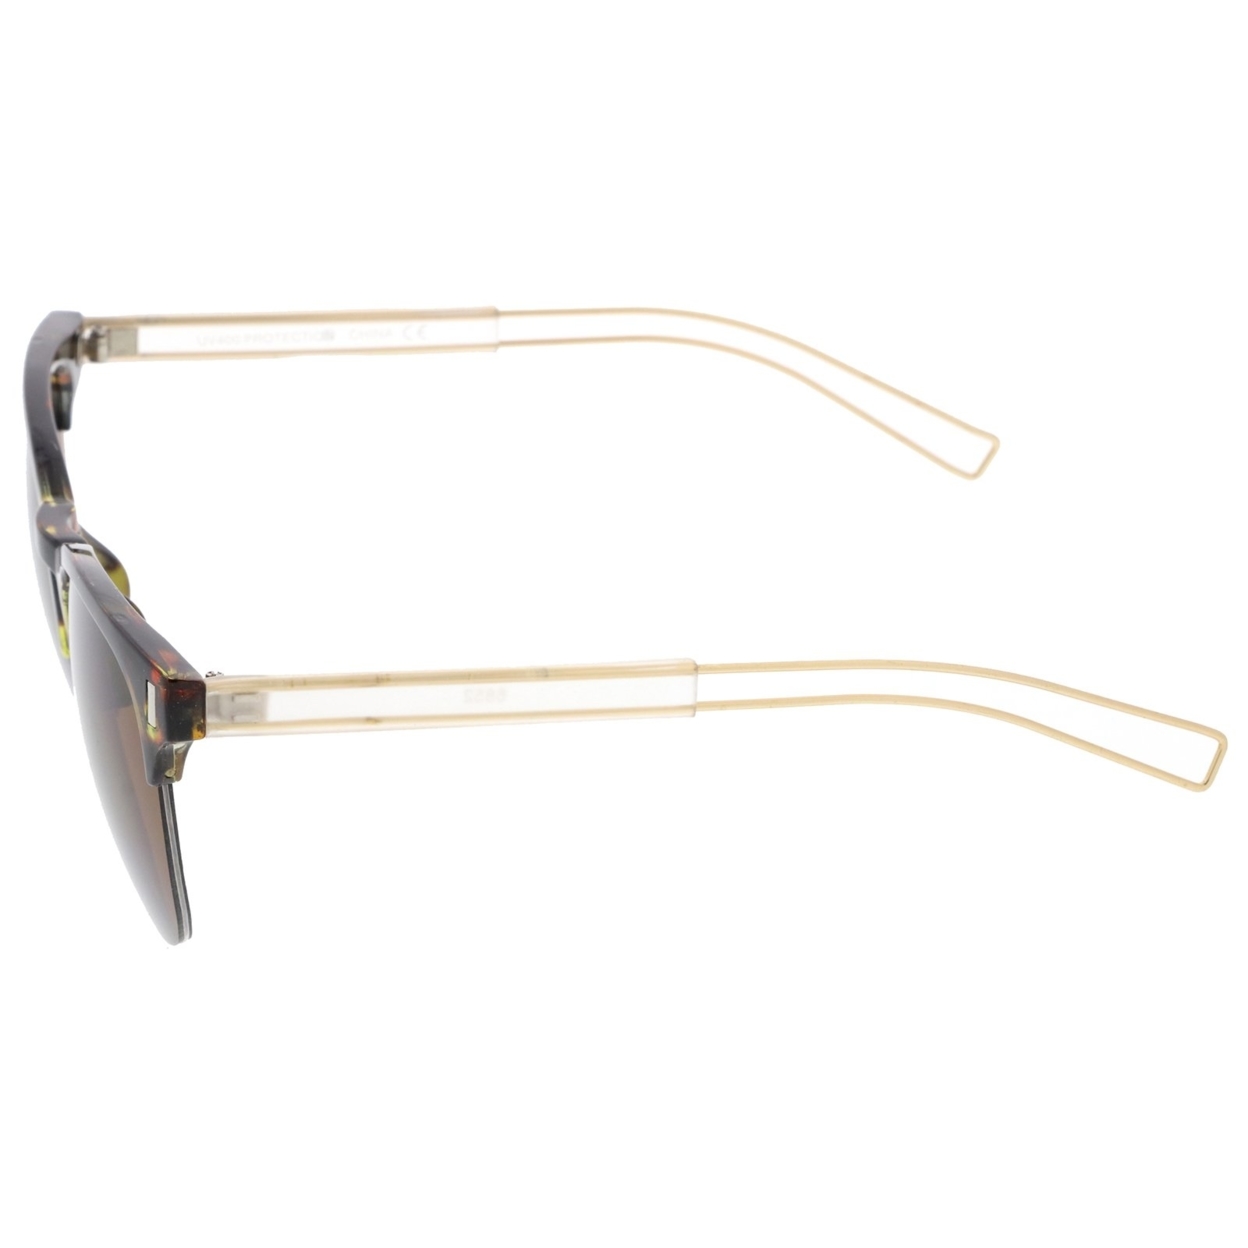 Semi Rimless Wire Hook Temples Square Lens Horn Rimmed Sunglasses 56mm - Tortoise-Gold / Brown